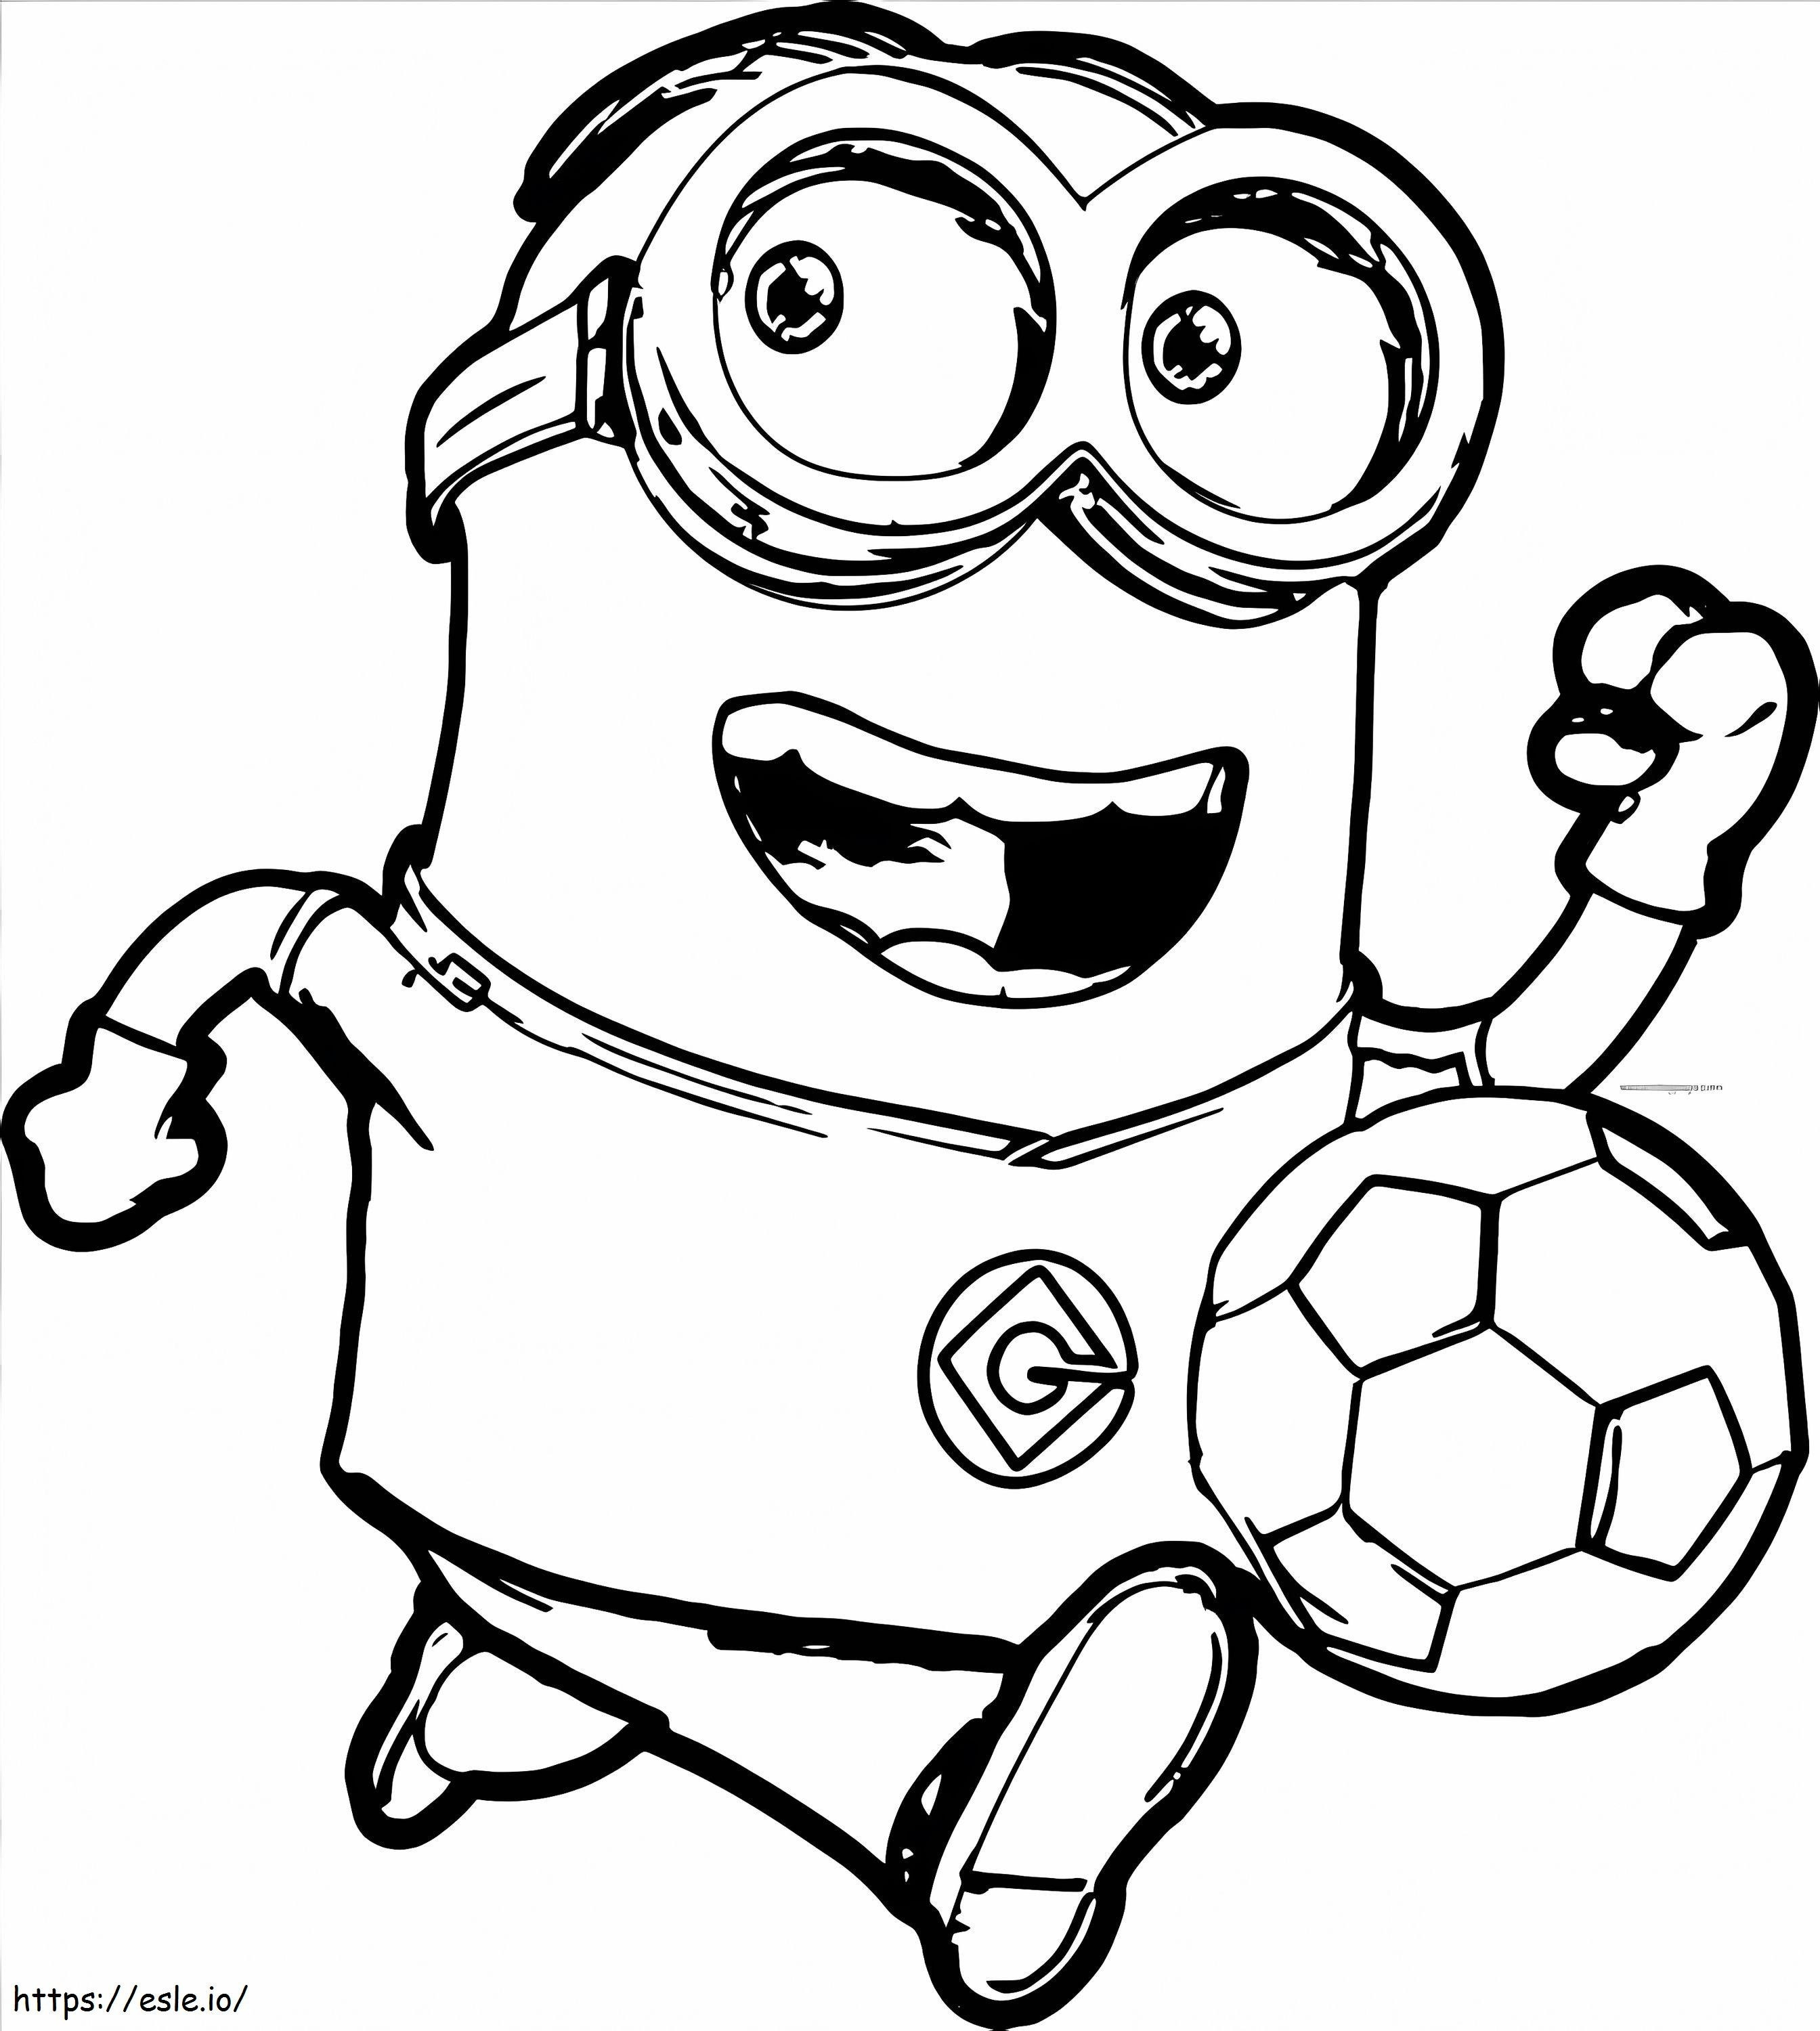 Drawing Minion Playing Soccer coloring page